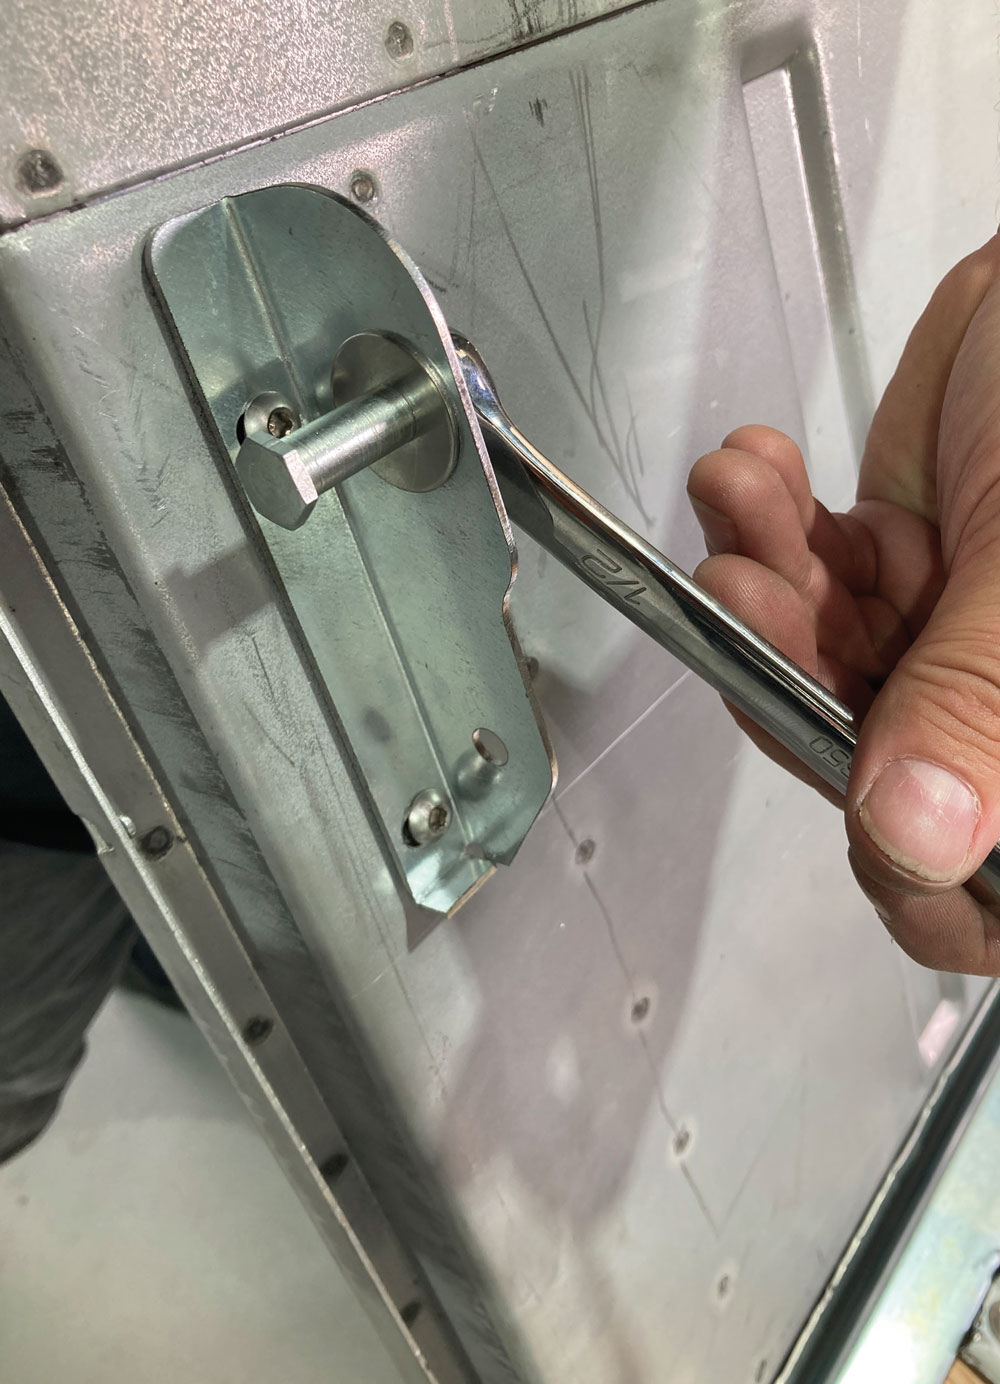 latch pin being screwed into place